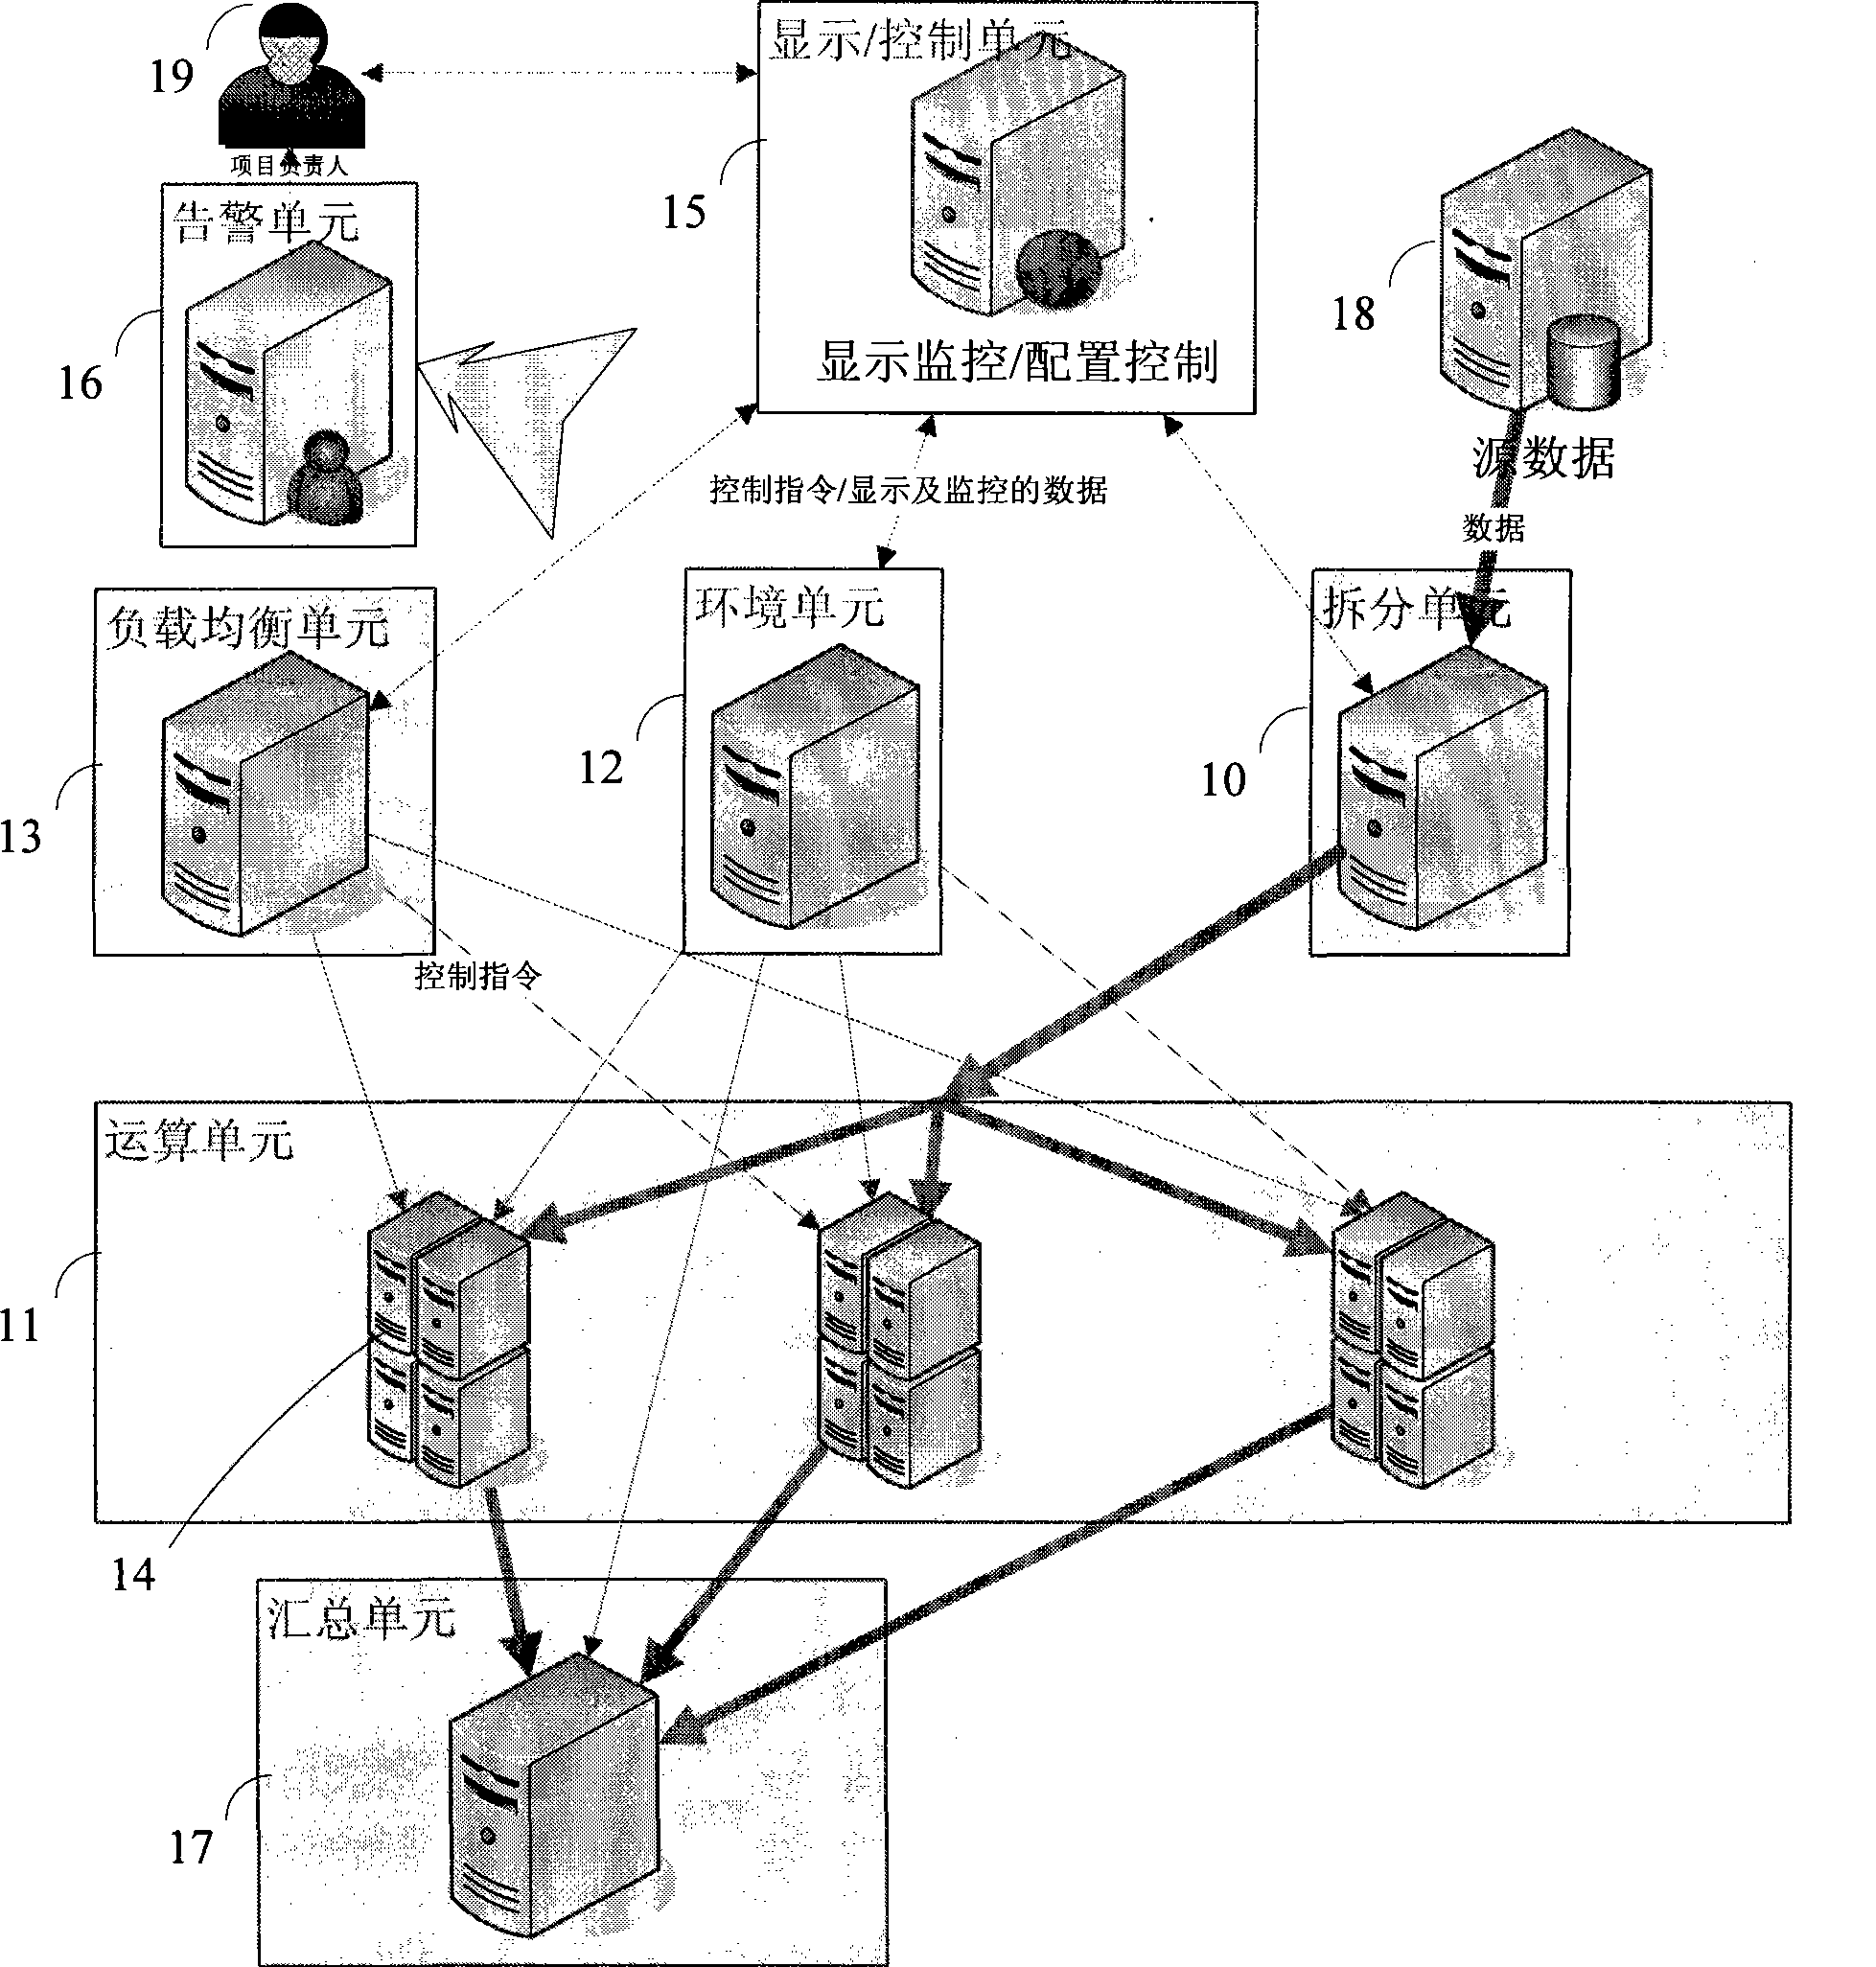 Distributed parallel calculating system and method based on dynamic data division